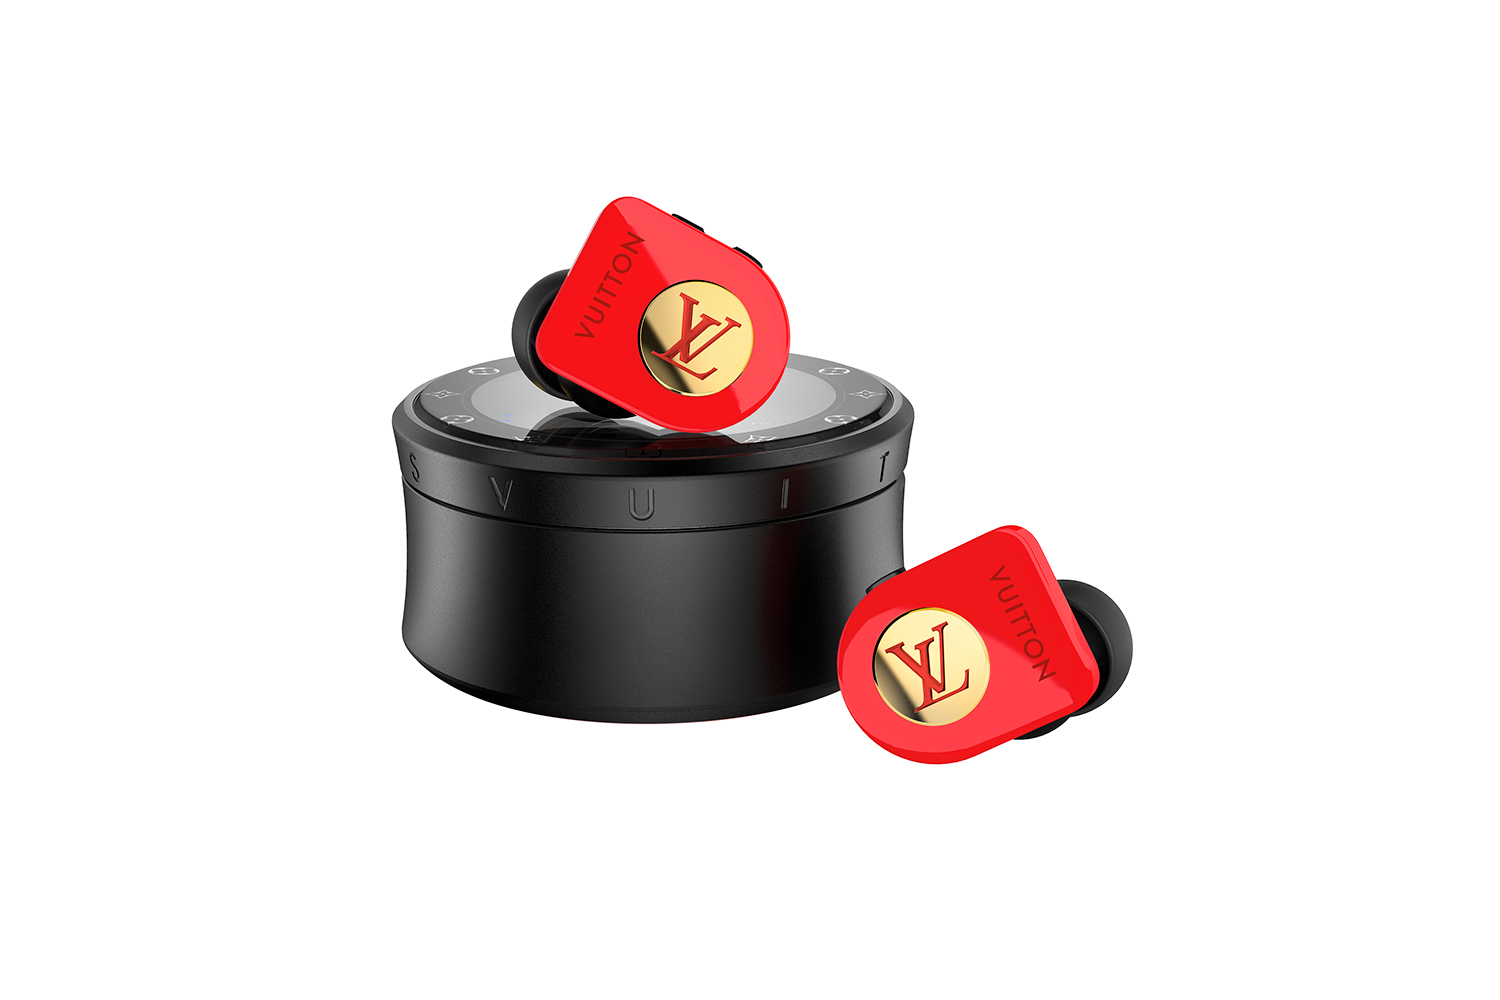 Louis Vuitton Horizon Light Up Earphones Now Available In Malaysia For  RM7,250 